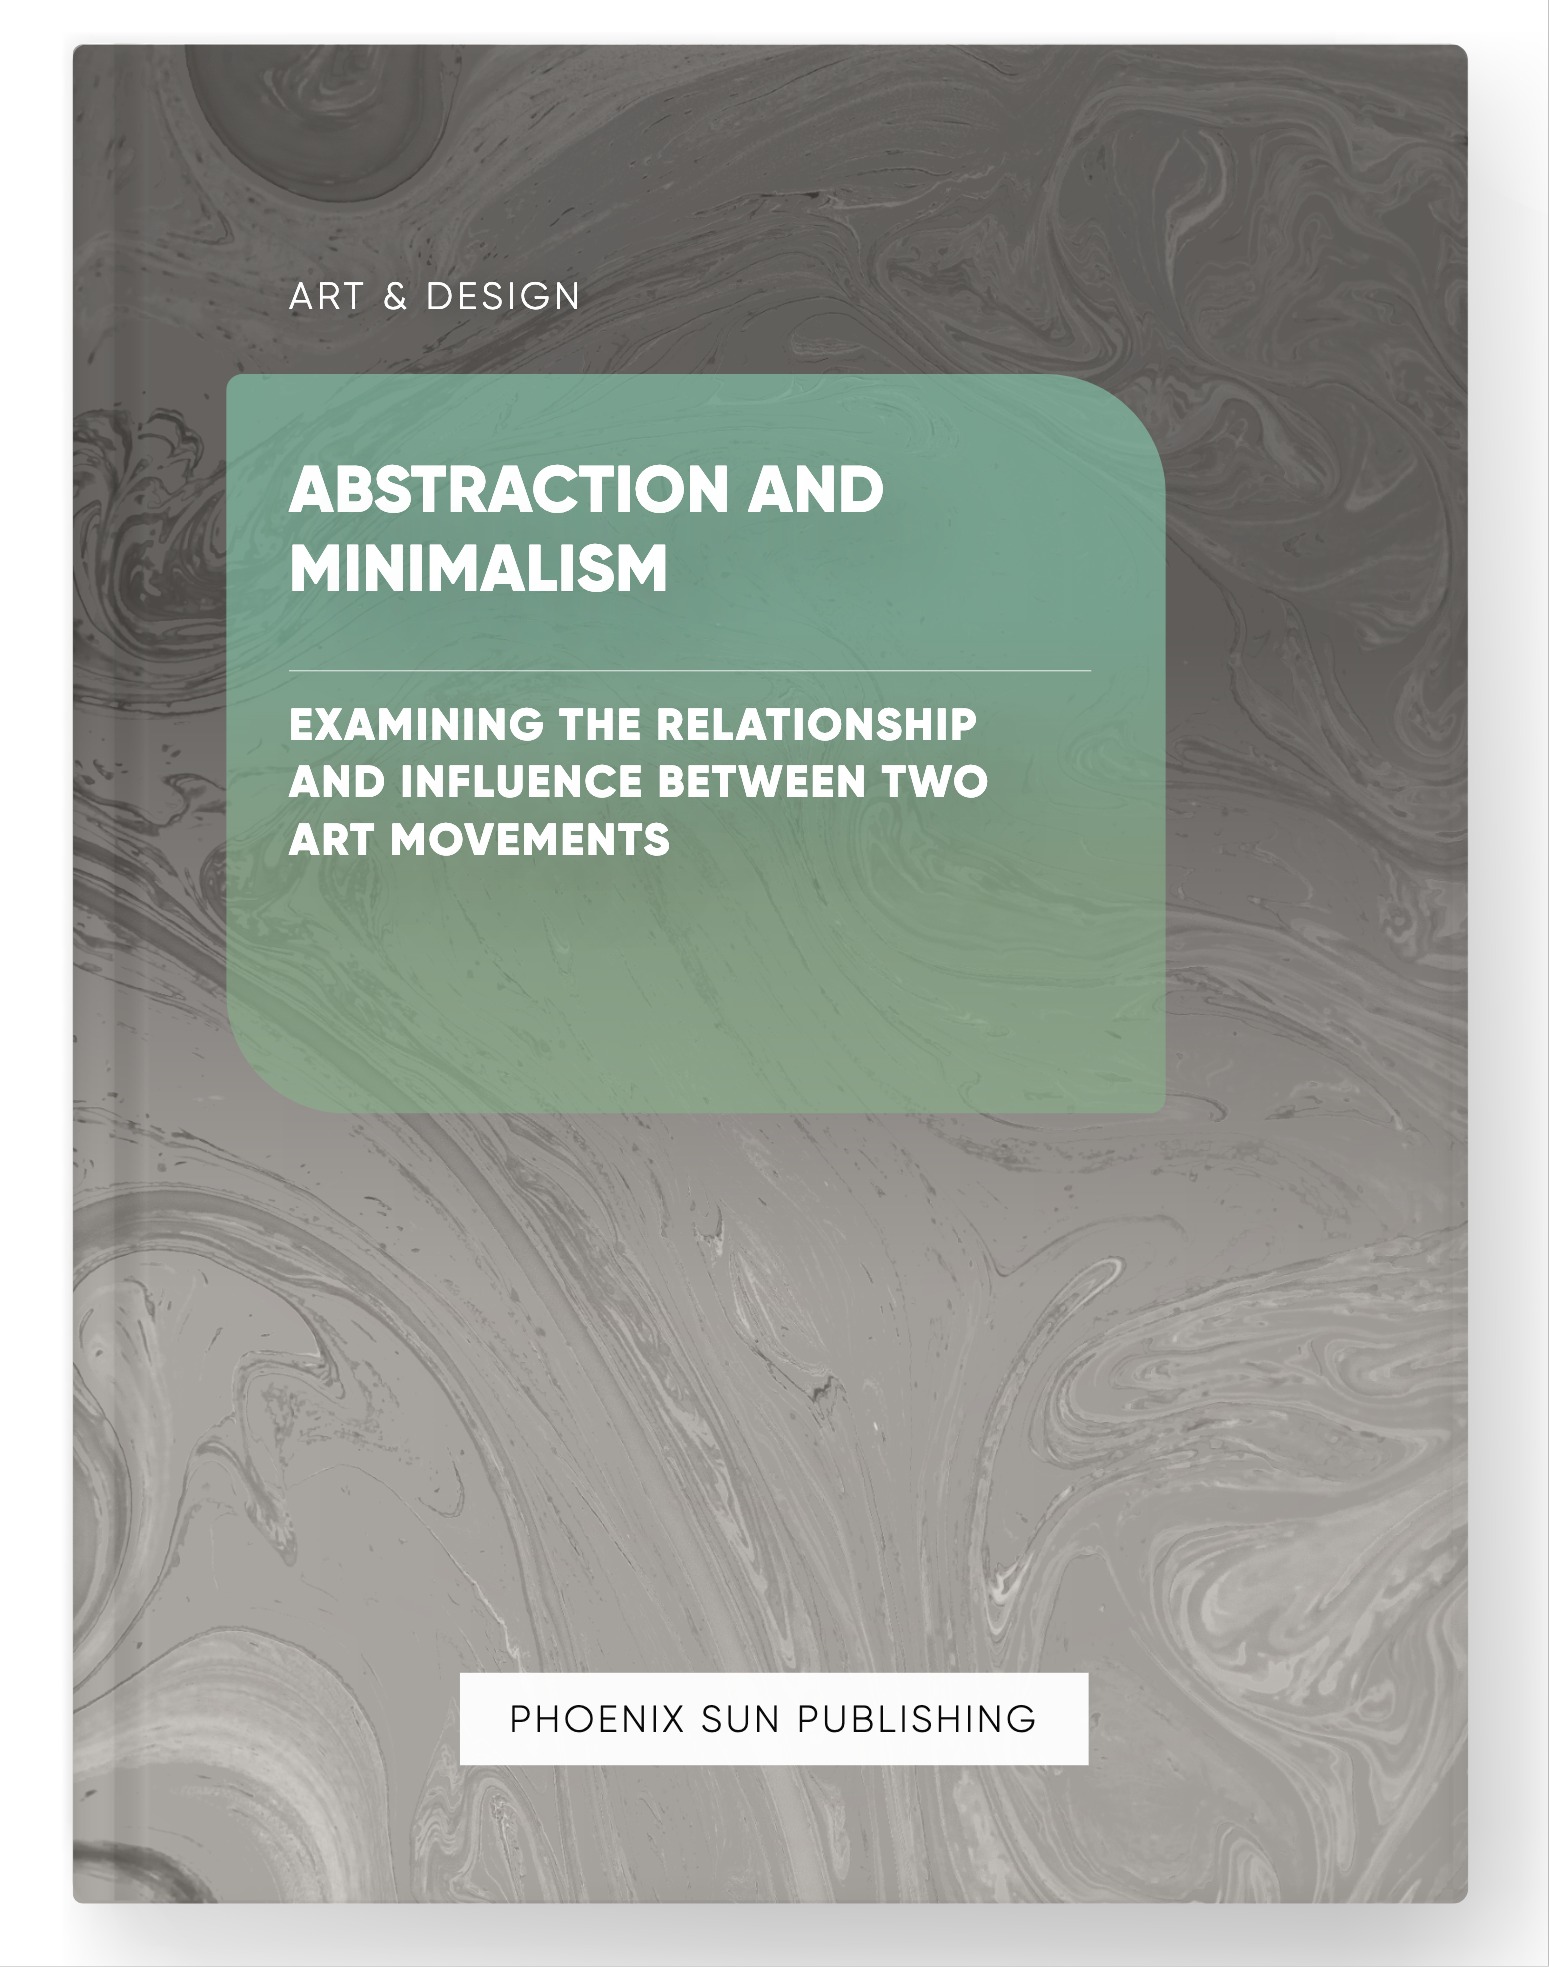 Abstraction and Minimalism – Examining the Relationship and Influence Between Two Art Movements